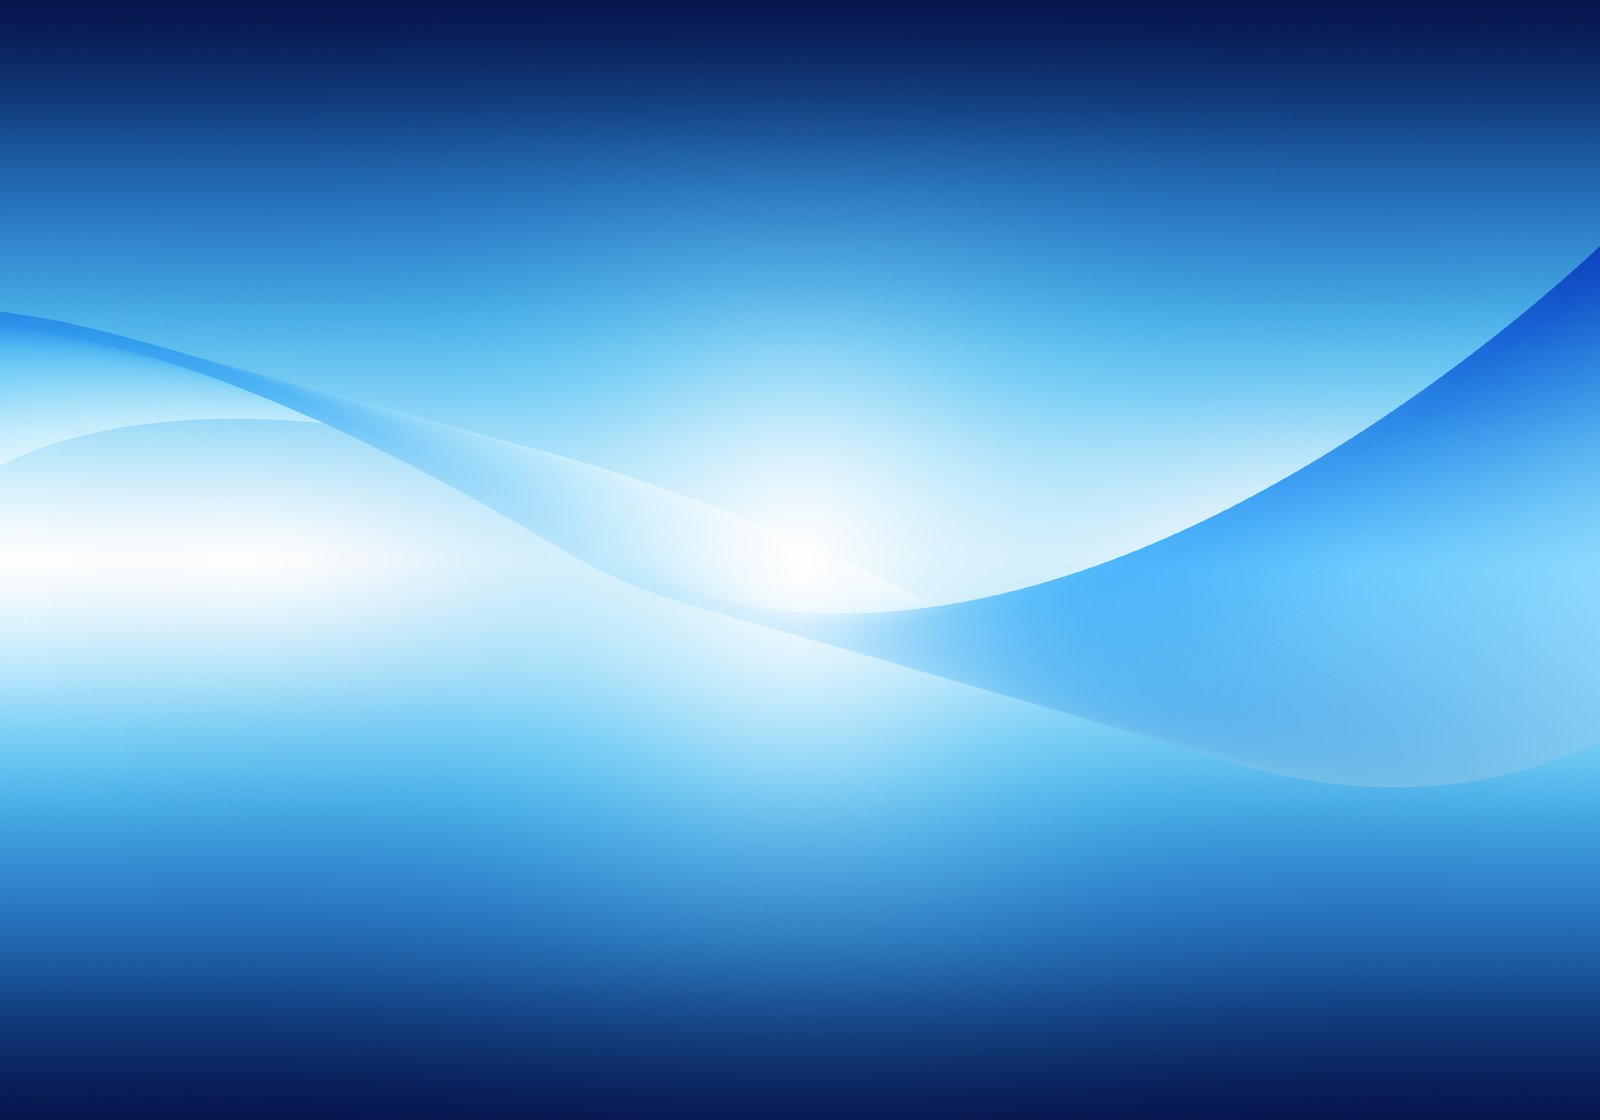 a background with blue colors and white lighting